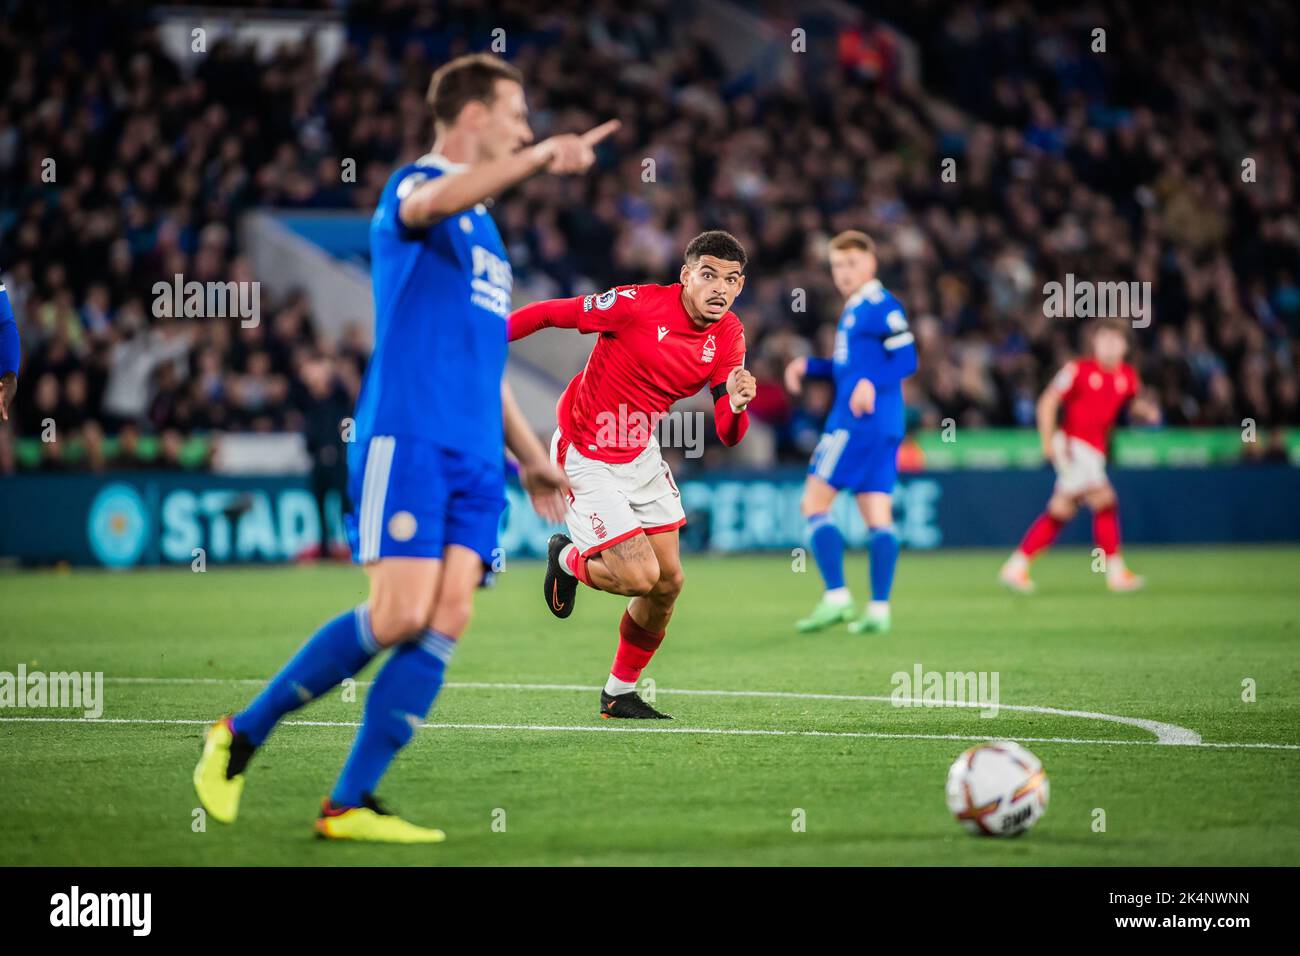 Morgan Gibbs-White #10 of Nottingham Forest looks to chase down the defence during the Premier League match Leicester City vs Nottingham Forest at King Power Stadium, Leicester, United Kingdom, 3rd October 2022  (Photo by Ritchie Sumpter/News Images) Stock Photo